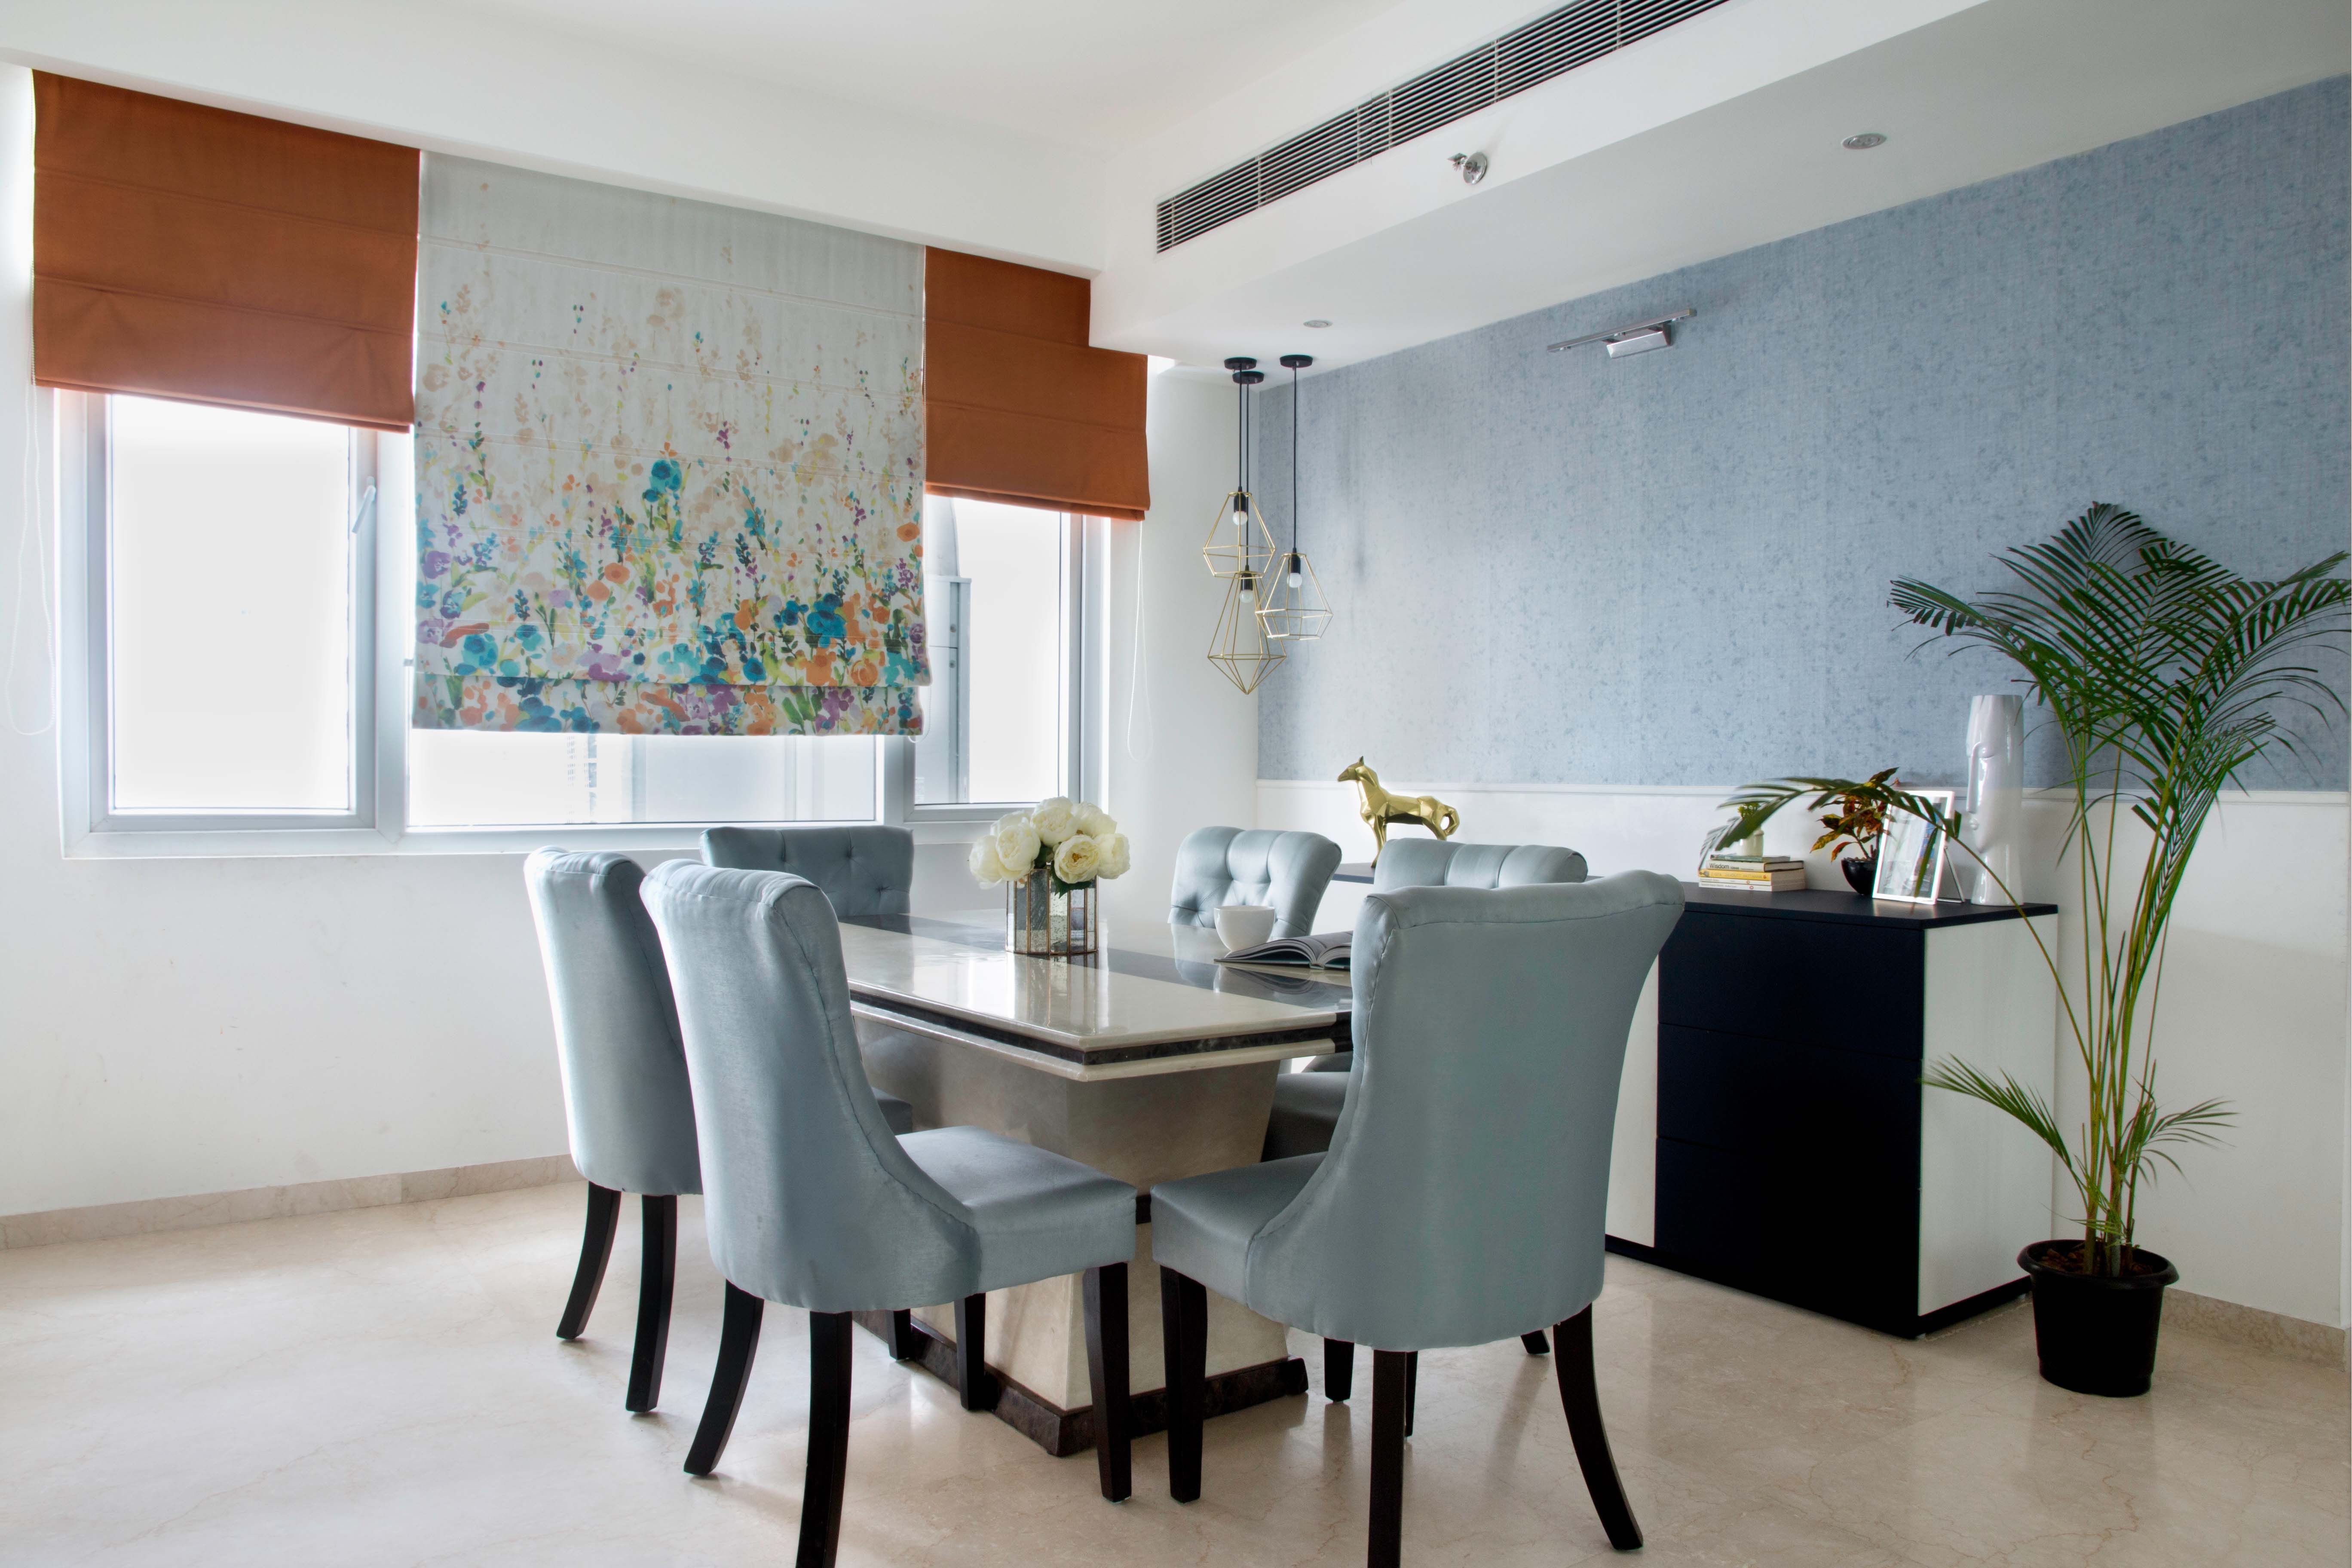 Modern 1-BHK Flat In Delhi With 6-Seater Dining Room Design